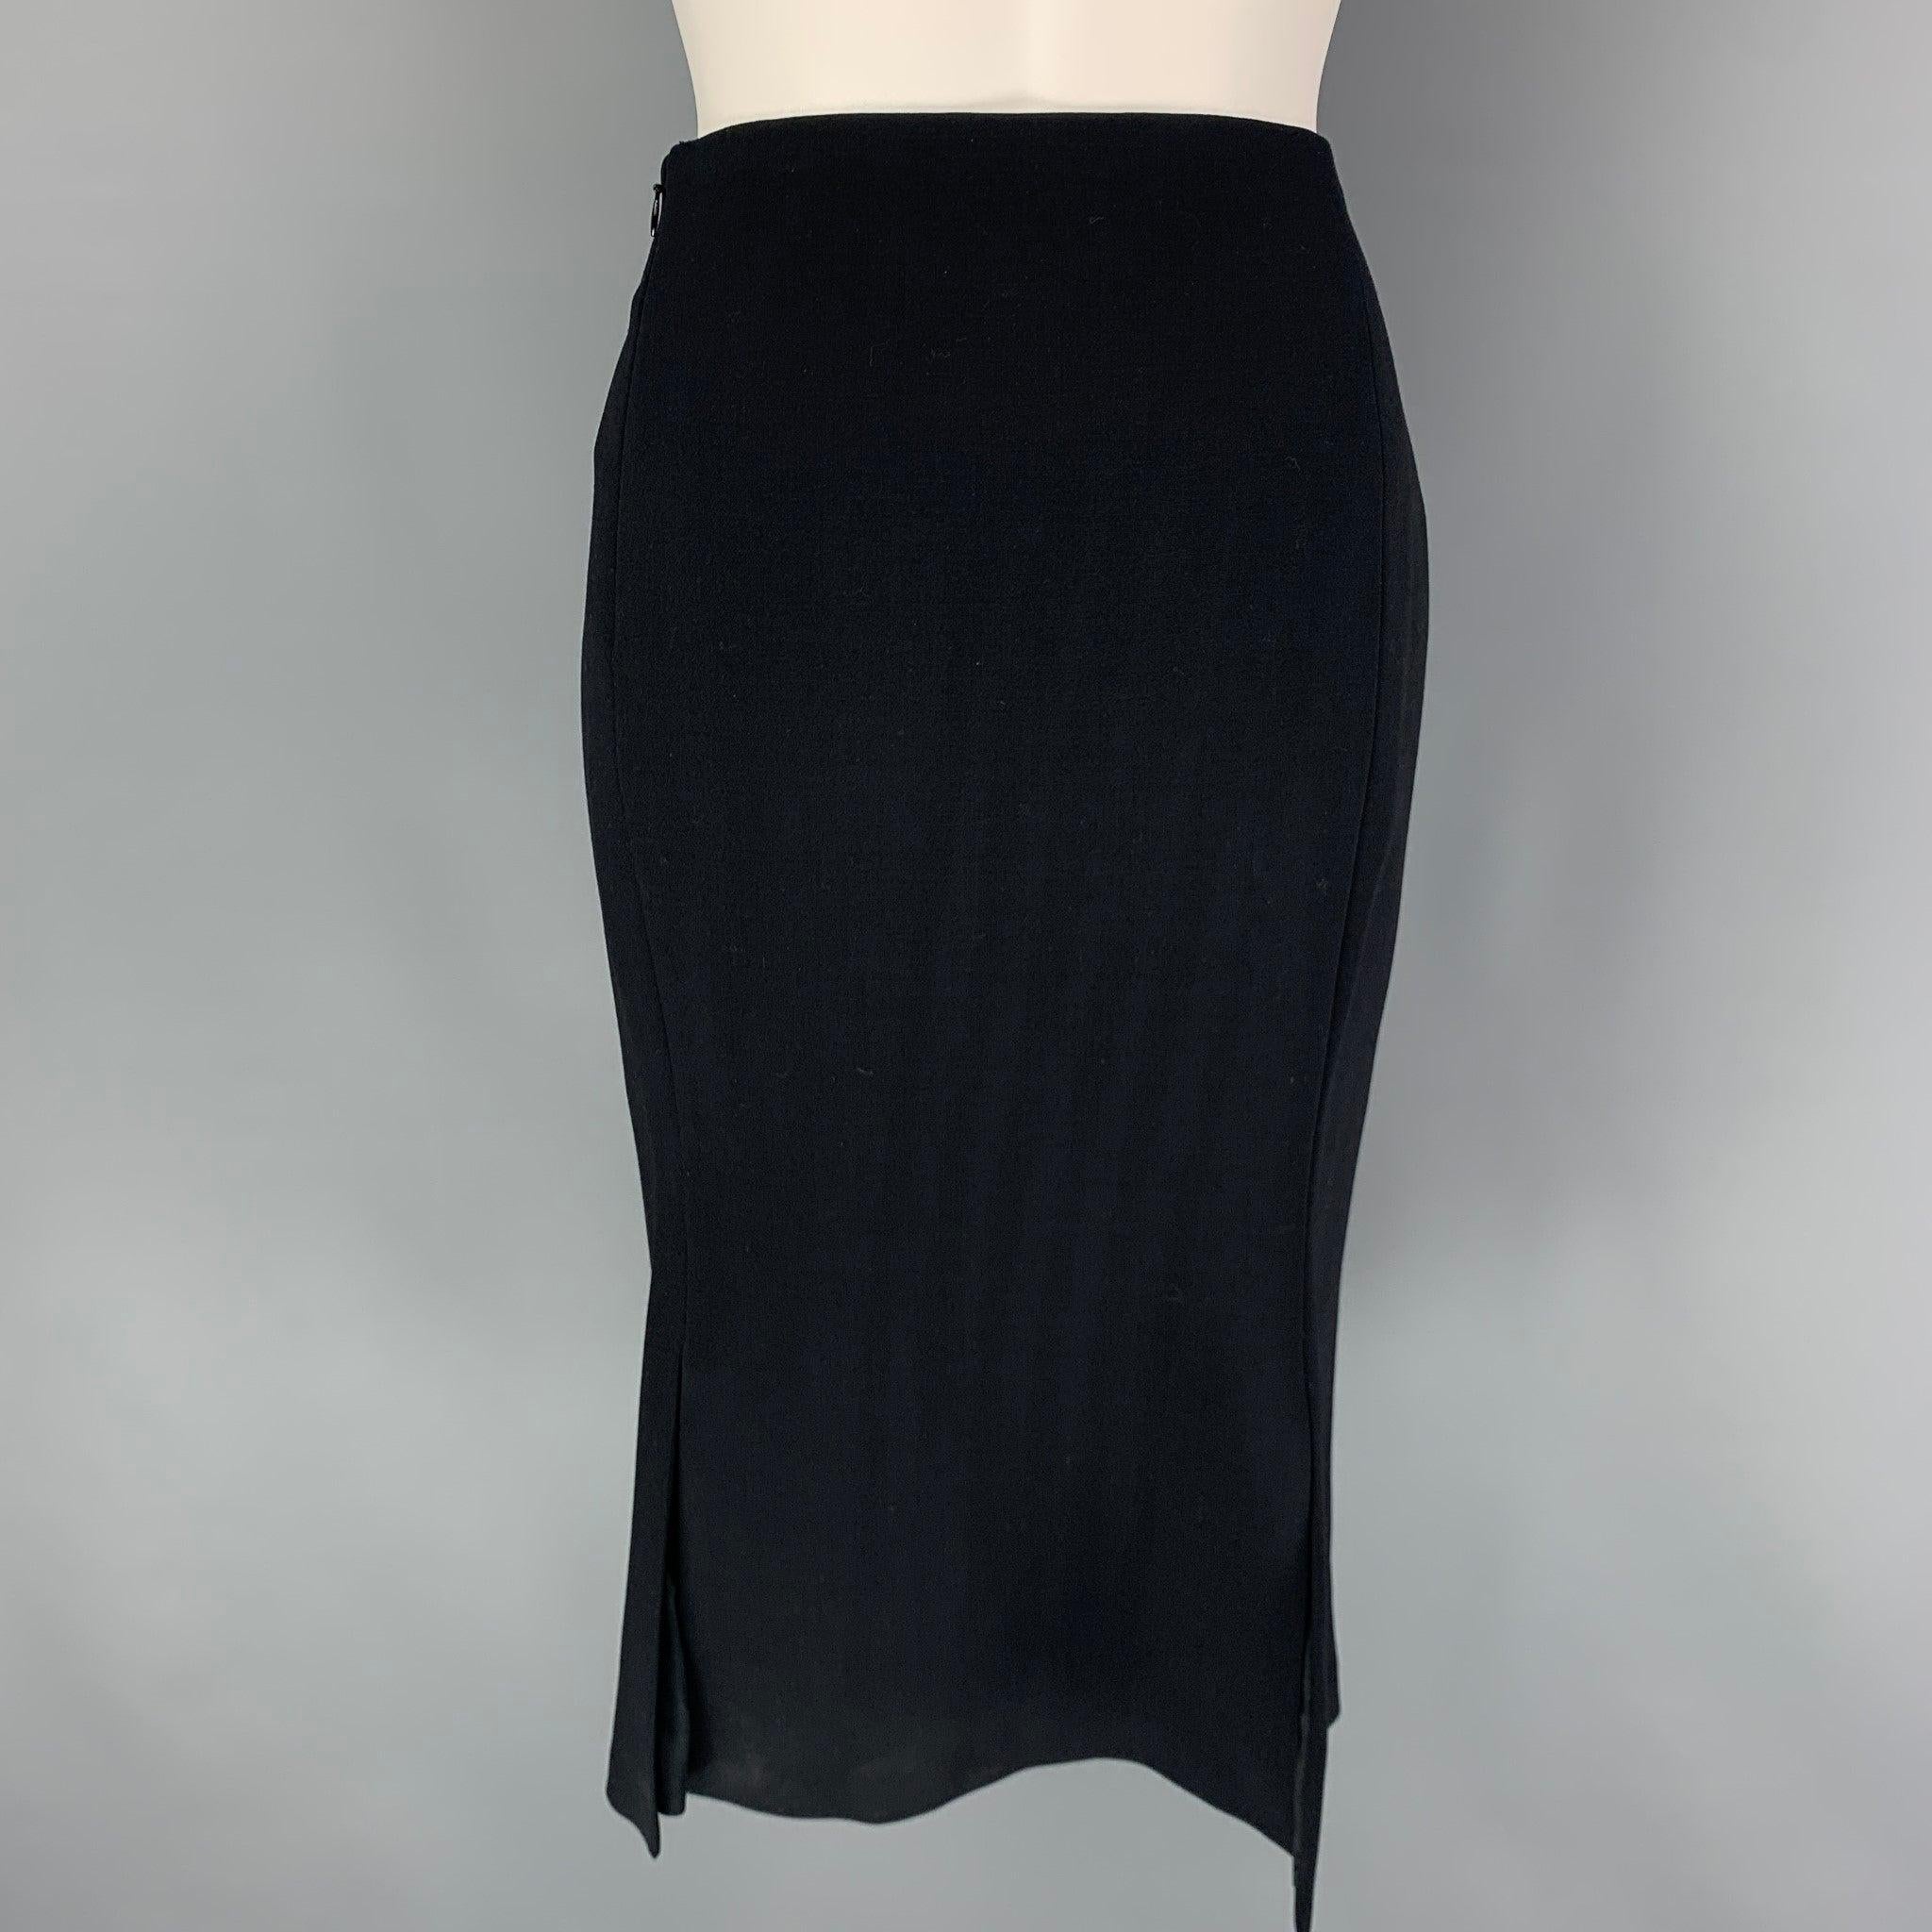 RALPH LAUREN Black Label Size 8 Black Wool Pencil Skirt In Good Condition For Sale In San Francisco, CA